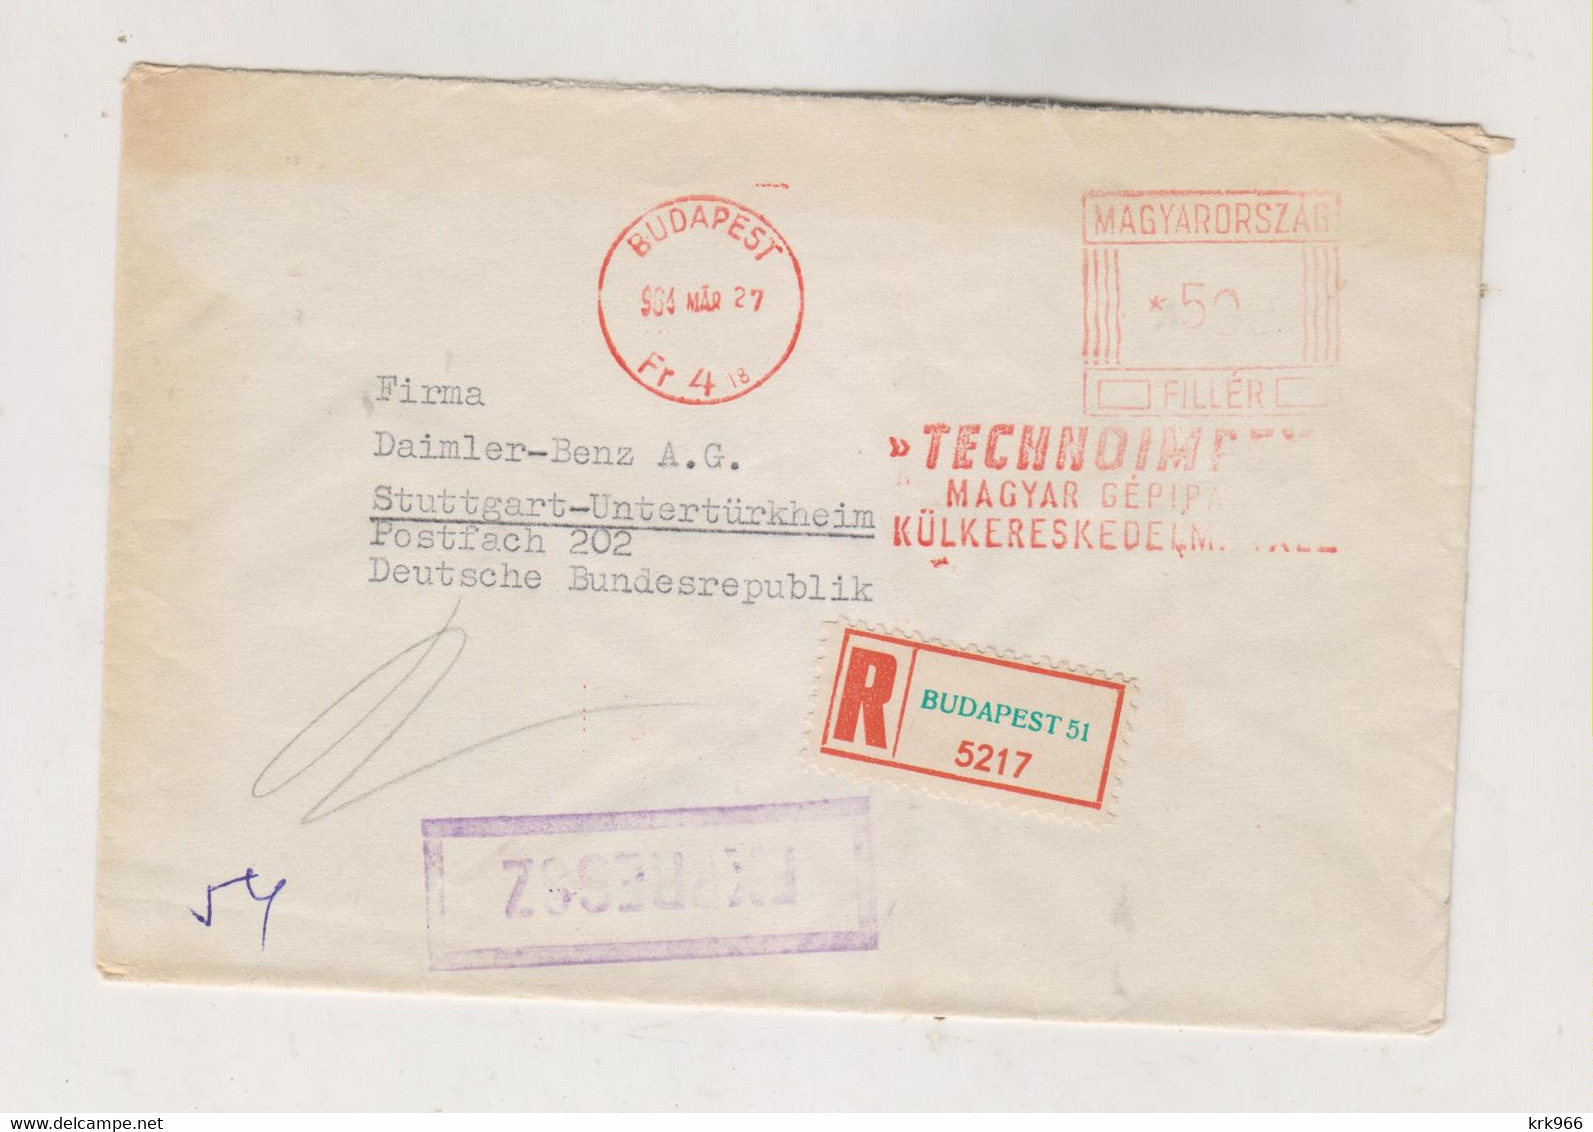 HUNGARY BUDAPEST 1964  Nice Registered   Priority  Cover To Germany Meter Stamp - Covers & Documents